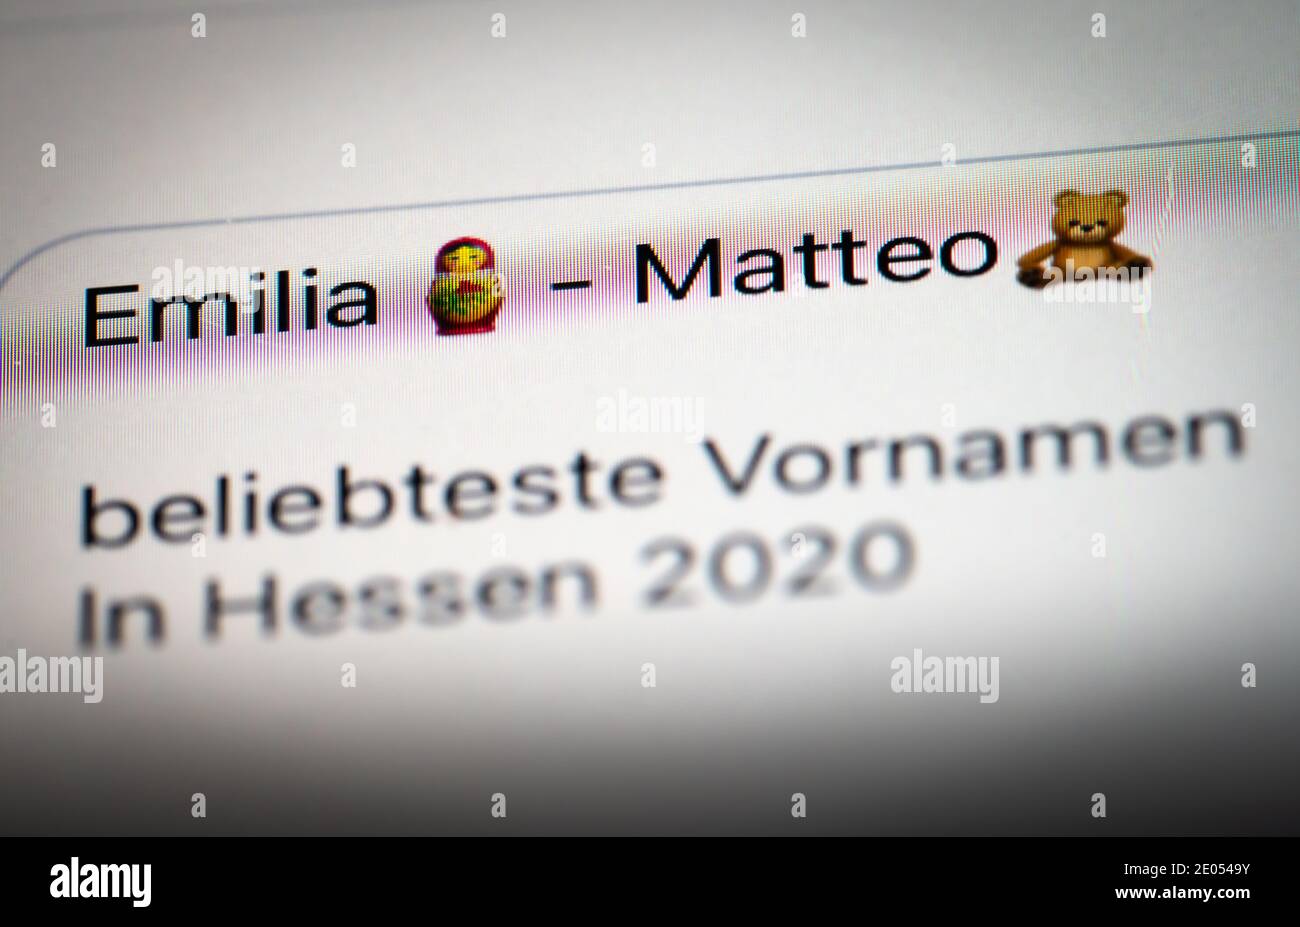 ILLUSTRATION - 29 December 2020, Hessen, Frankfurt/Main: The names Emilia and Matteo can be seen on the display of a mobile phone. They are the most popular first names for girls and boys in Hesse in 2020, as determined by the North German first name expert Knud Bielefeld, who publishes statistics on this every year. Photo: Frank Rumpenhorst/dpa Stock Photo